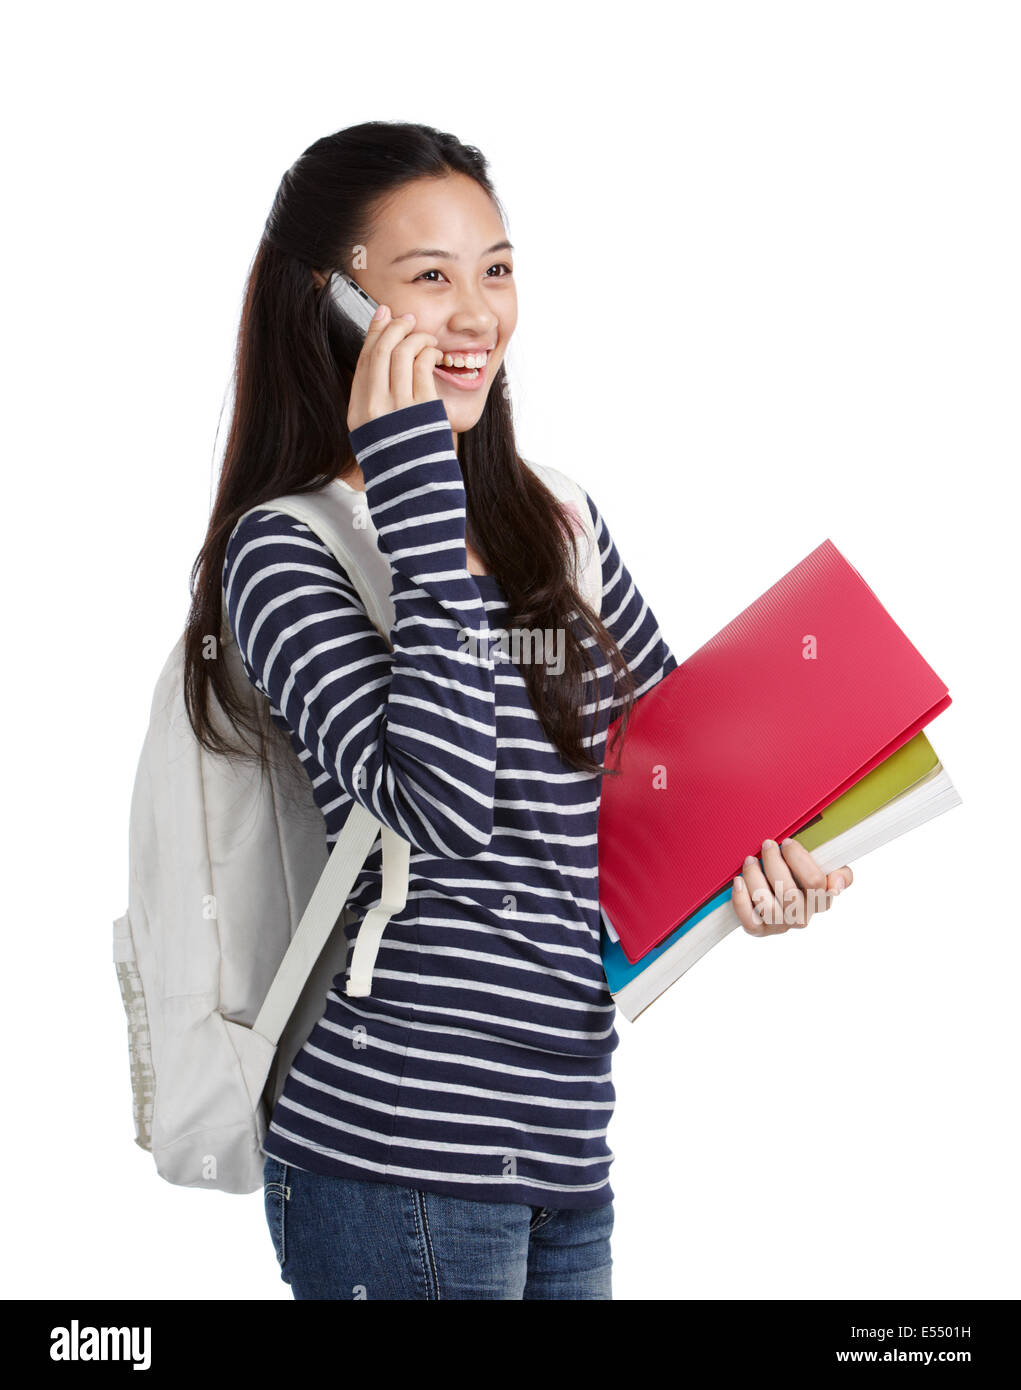 college student on the phone against white background Stock Photo